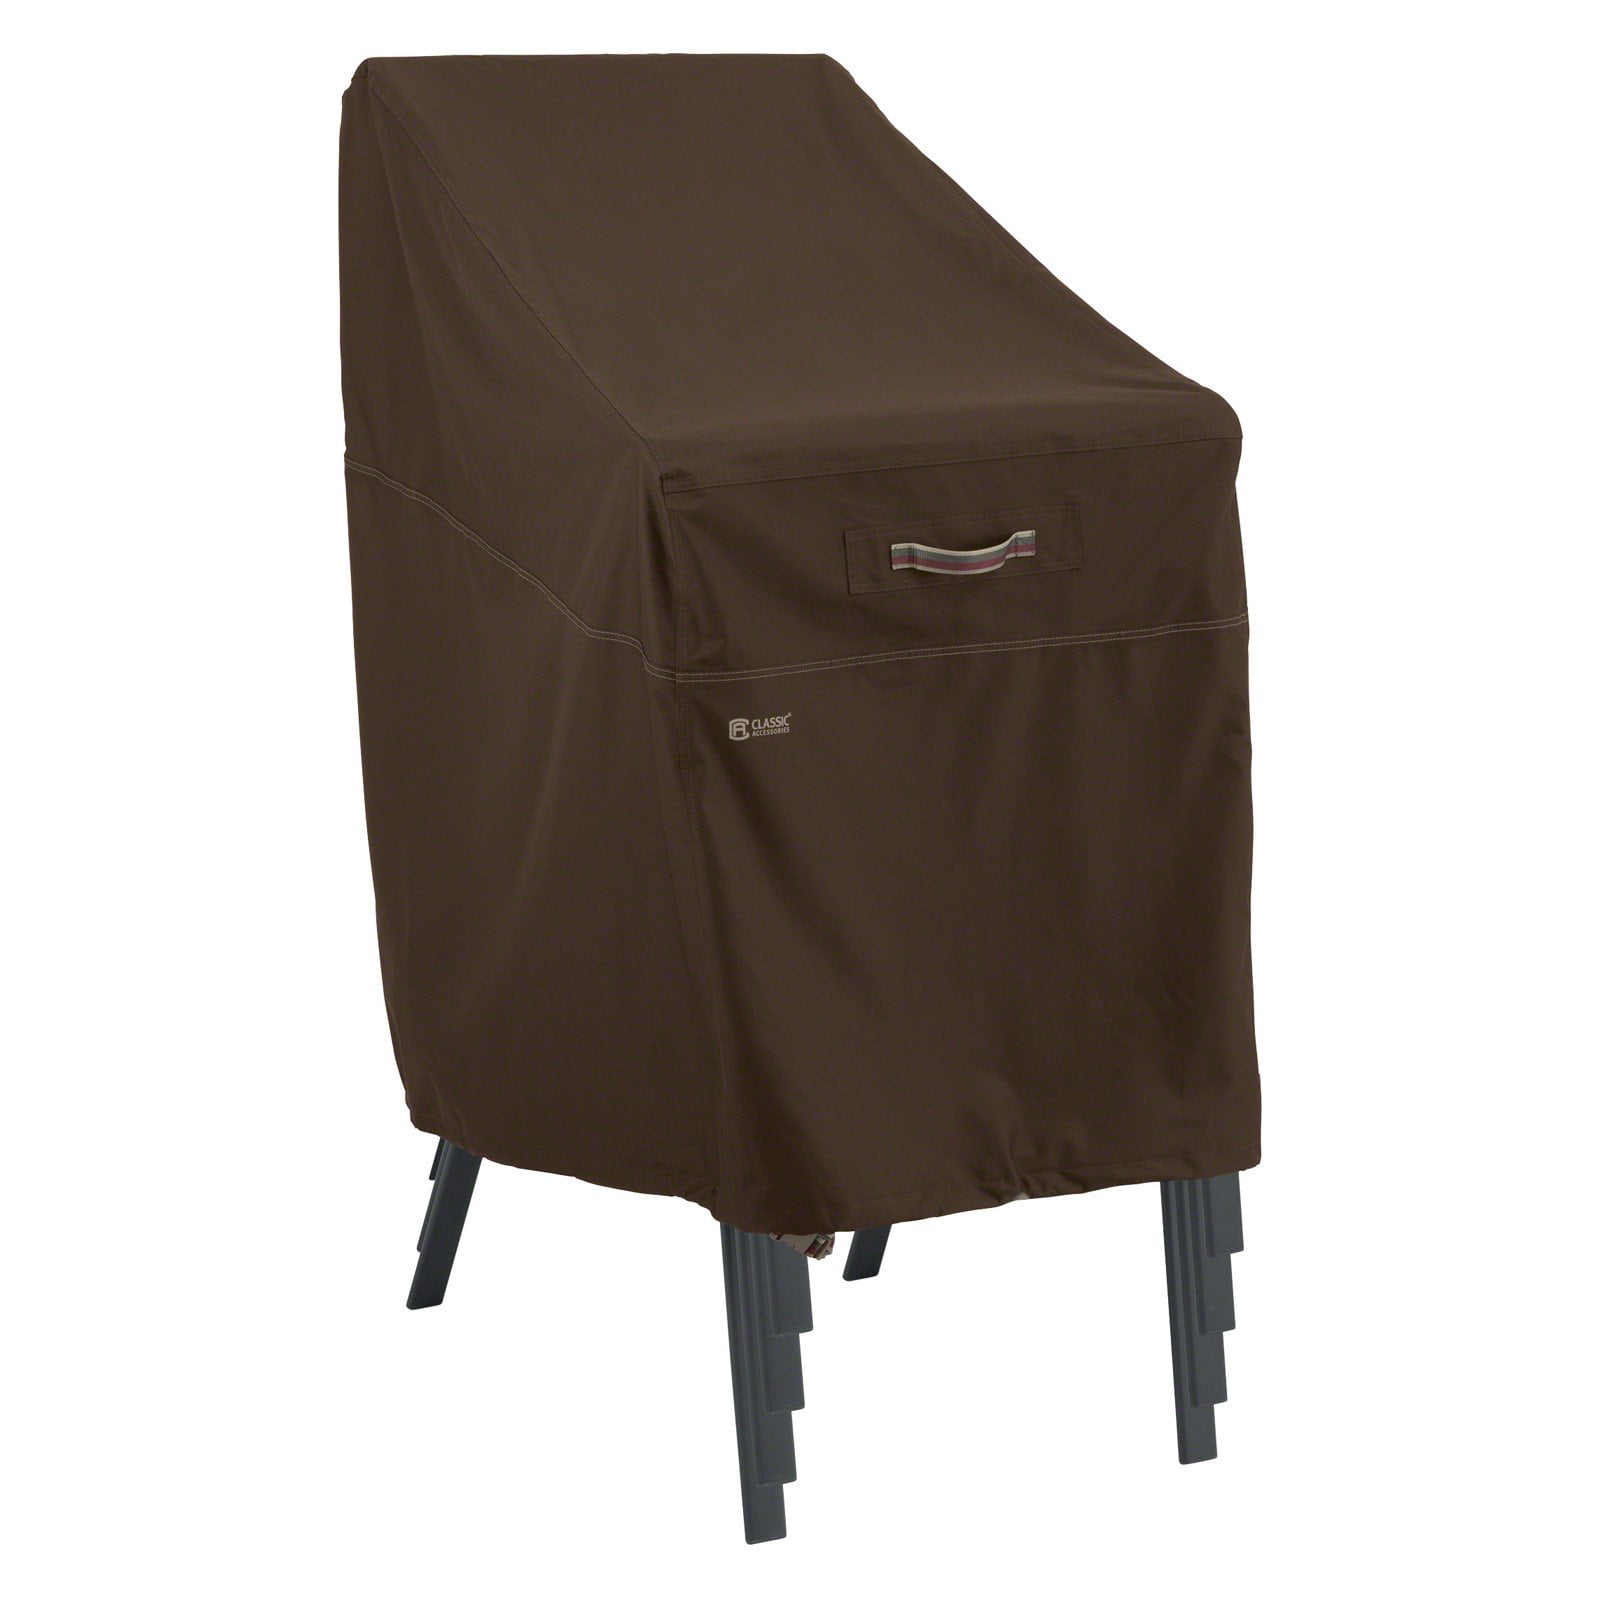 classic accessories madrona™ rainproof™ stackable patio chair cover